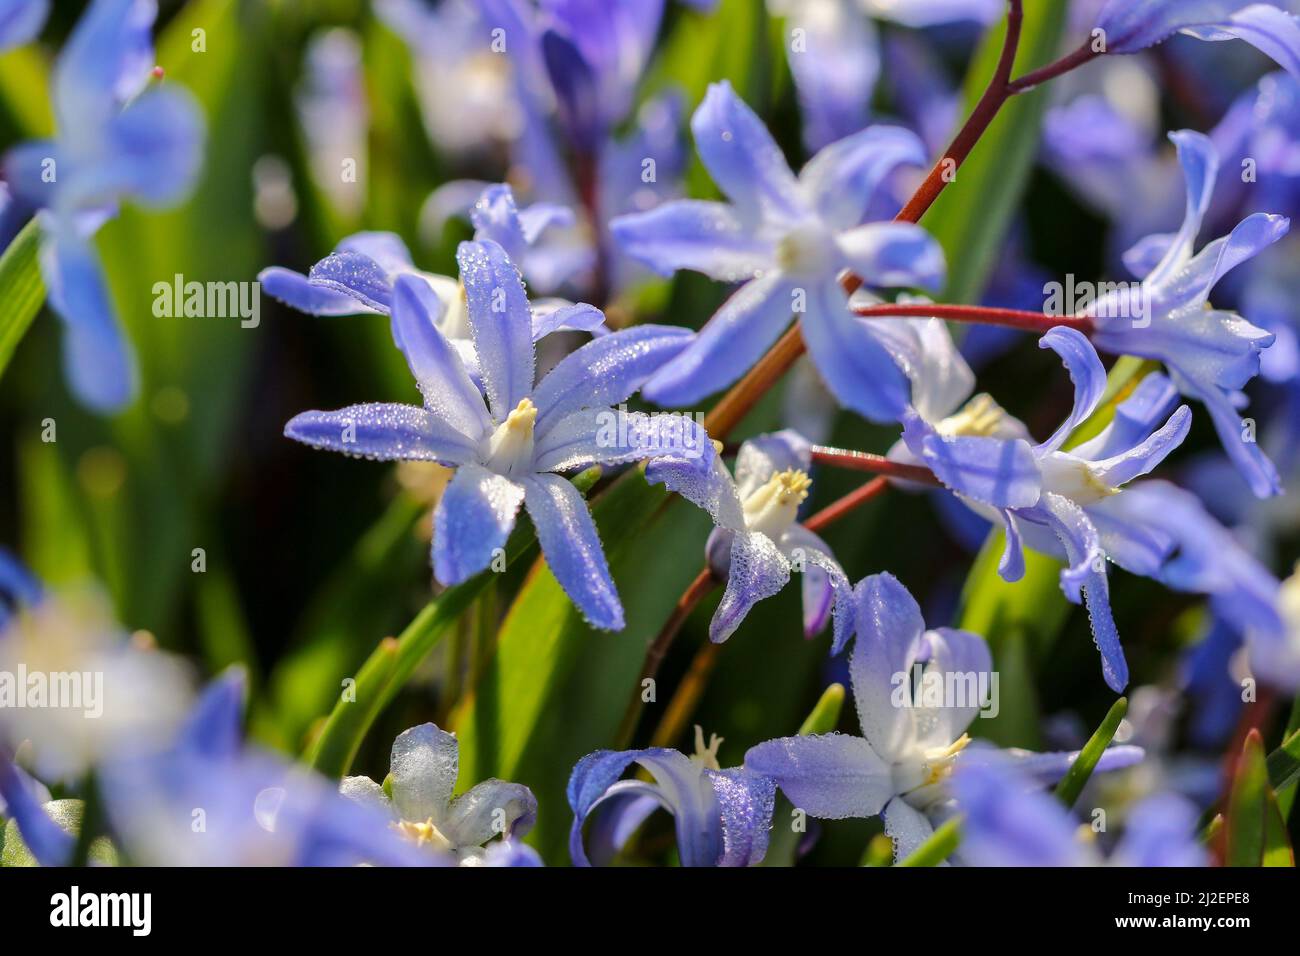 Hyacinthaceae 'Chionodoxa forbesii', blue violet flowers, with sunshine on dew drops. Macro close-up Spring flowers. Dublin, Ireland Stock Photo